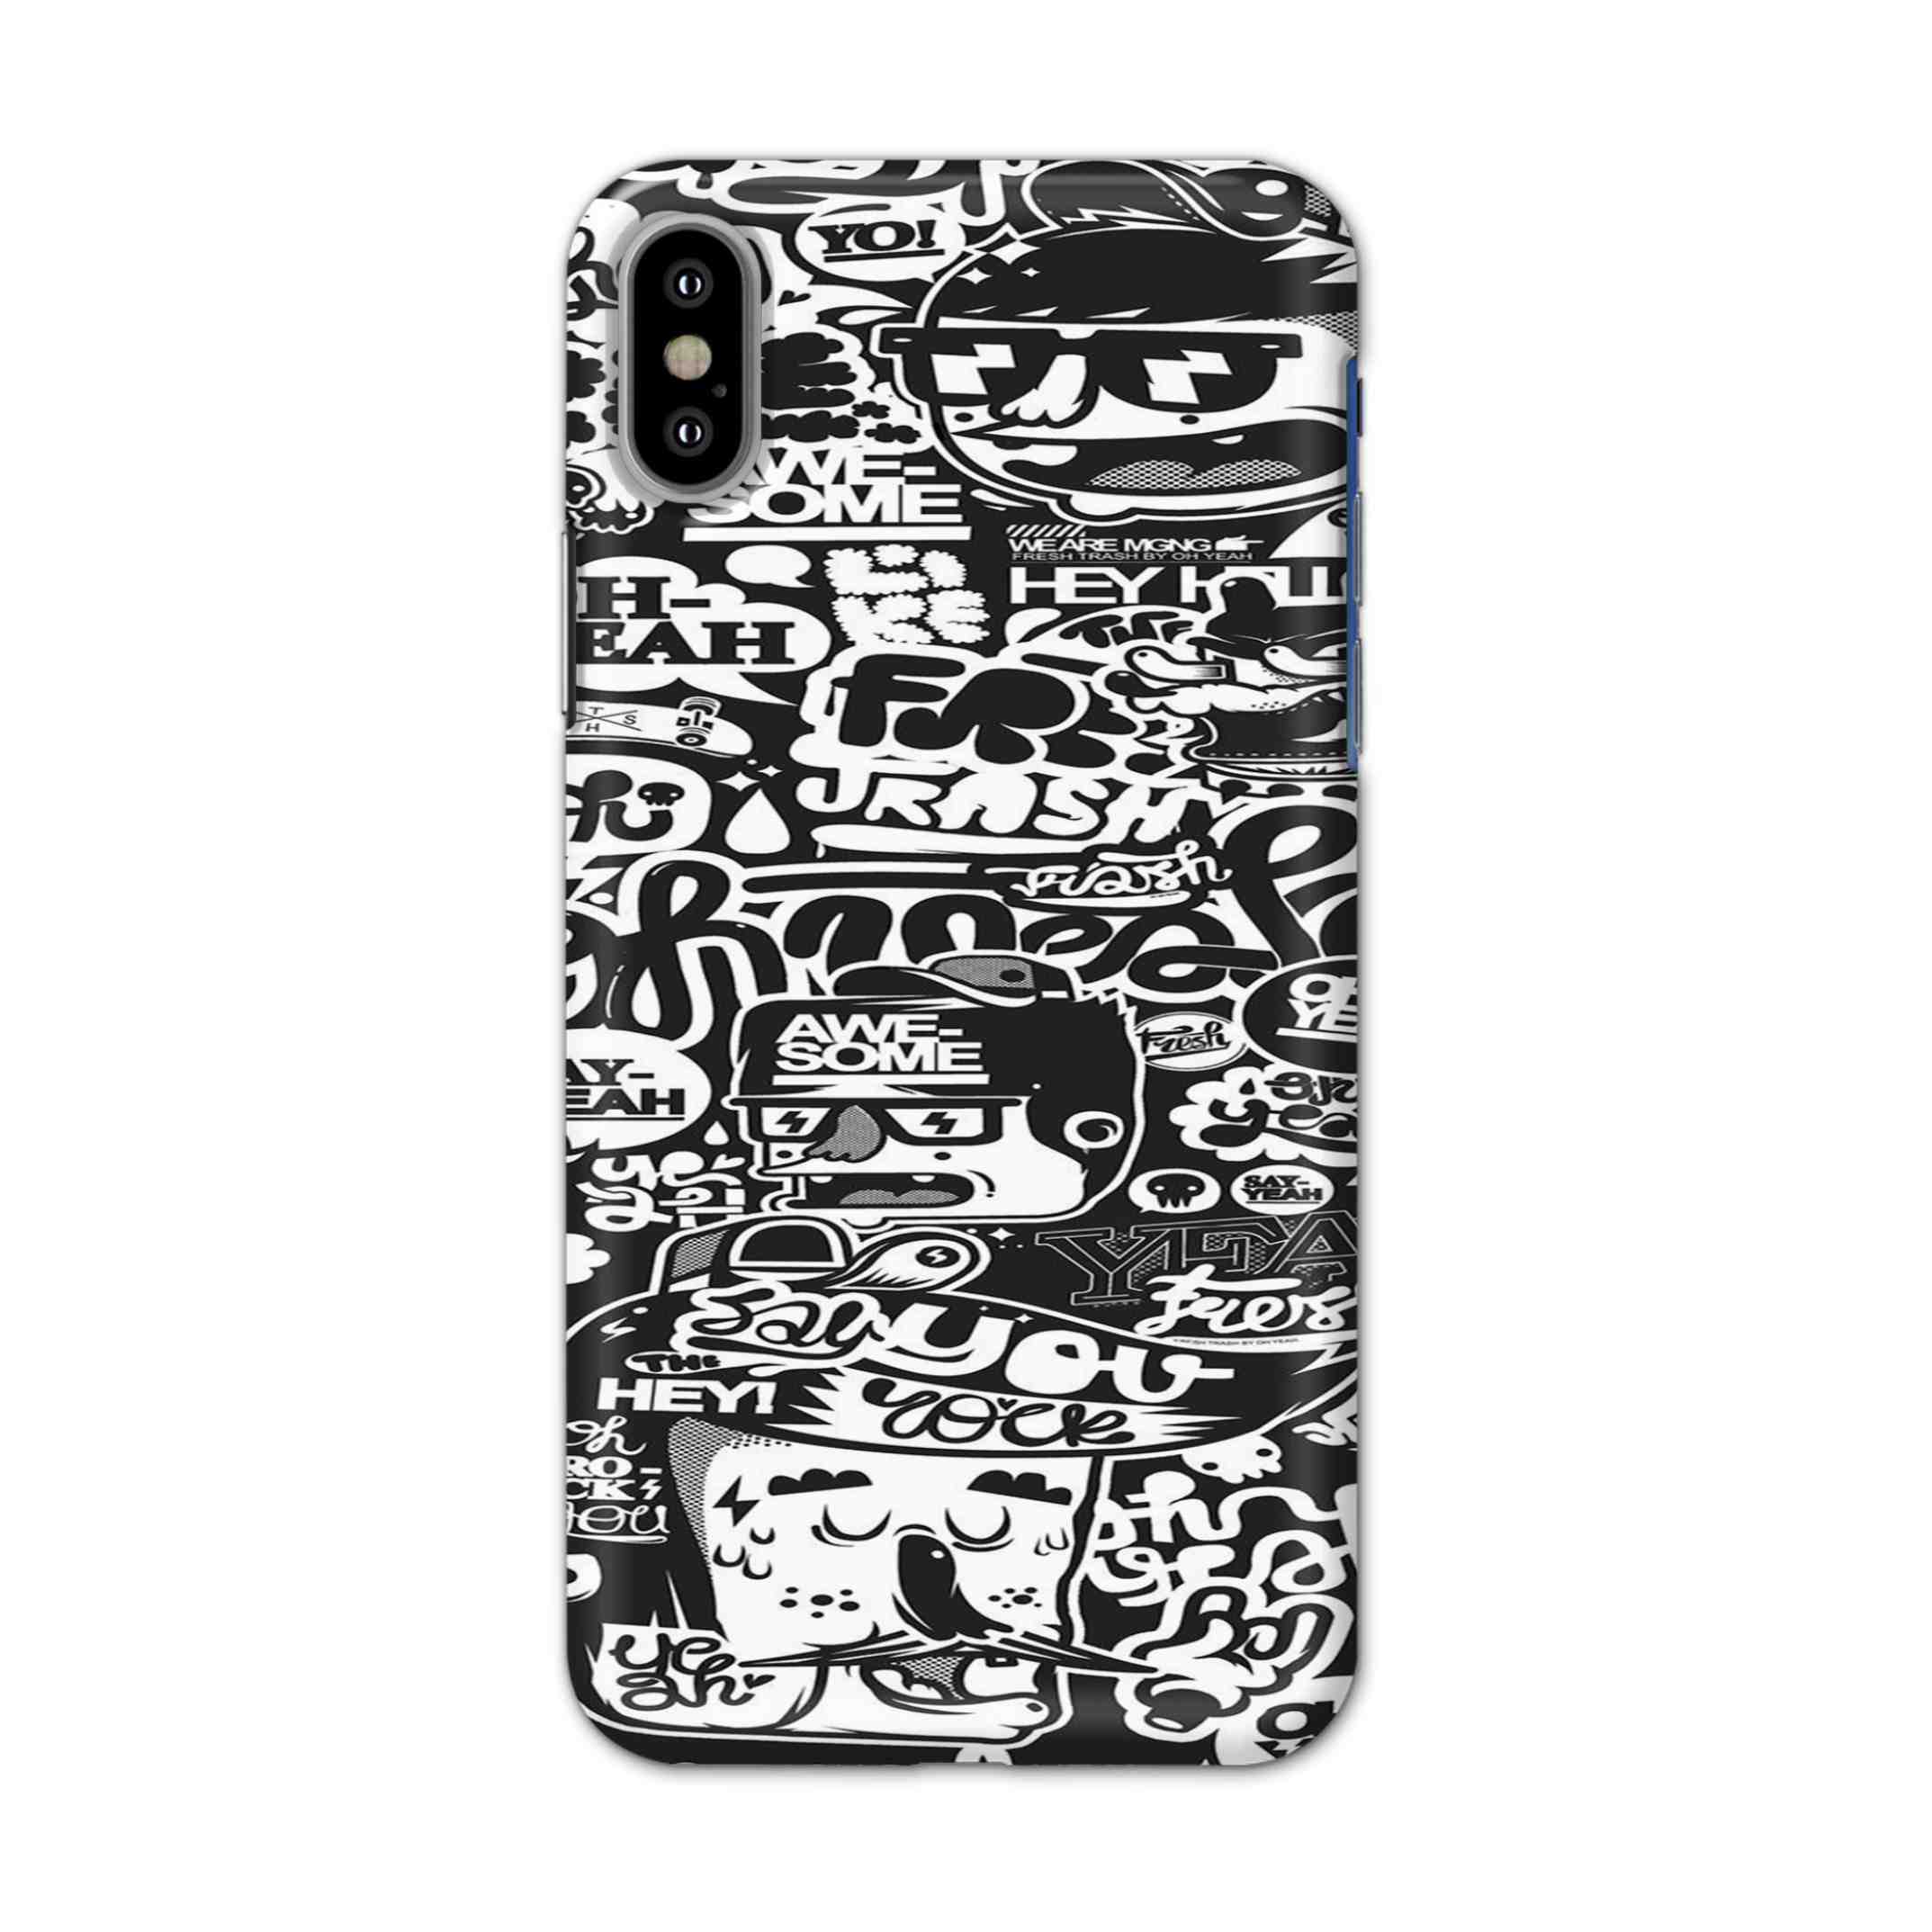 Buy Awesome Hard Back Mobile Phone Case/Cover For iPhone X Online